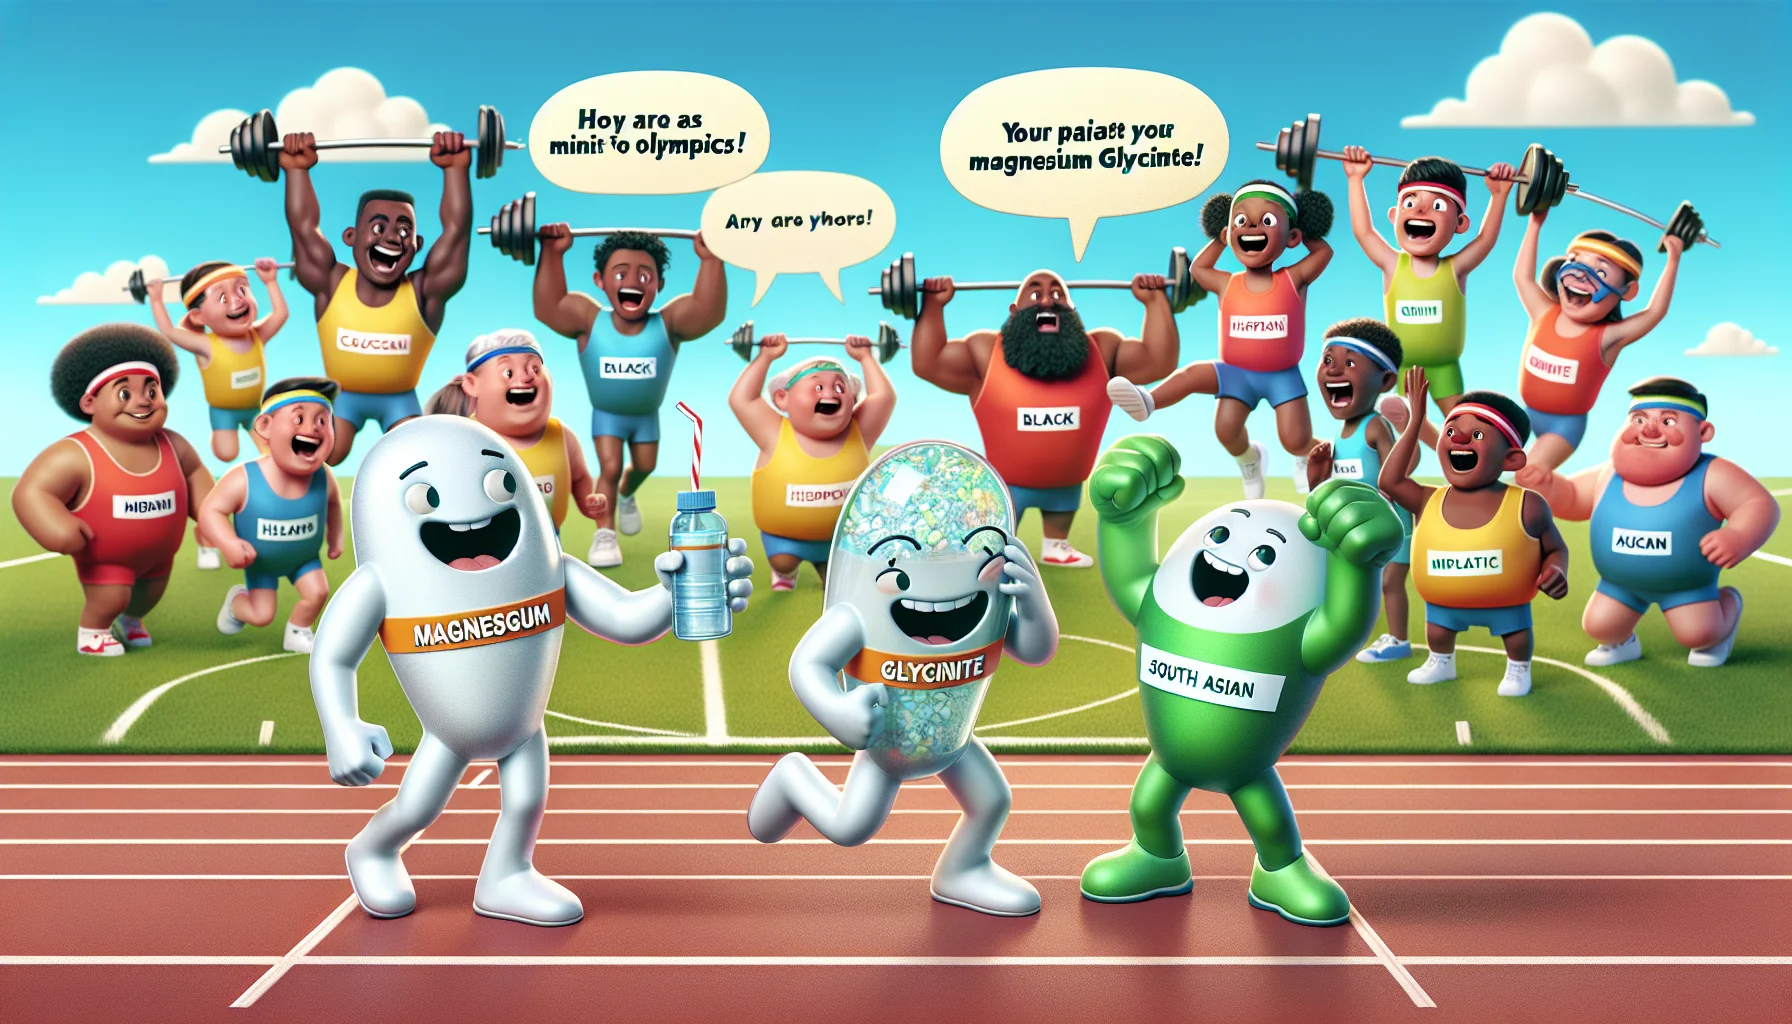 Create an image depicting a hilarious situation where lively, cartoon-like magnesium and glycinate characters are hosting a mini Olympics for children. The magnesium character, a lanky figure with a vibrant white hue is seen sprinting, while the glycinate figure, a robust character with a green tint is doing weightlifting. They are surrounded by jubilant children of various descent: Caucasian, Black, Hispanic, Middle-Eastern, South Asian, each performing different sporting activities. Each child has a speech bubble showing their enthusiastic endorsement of the magnesium glycinate supplement. Remember to have a colorful and joyful presentation overall to provoke curiosity about the use of supplements for sports in a sensitive and encouraging way.